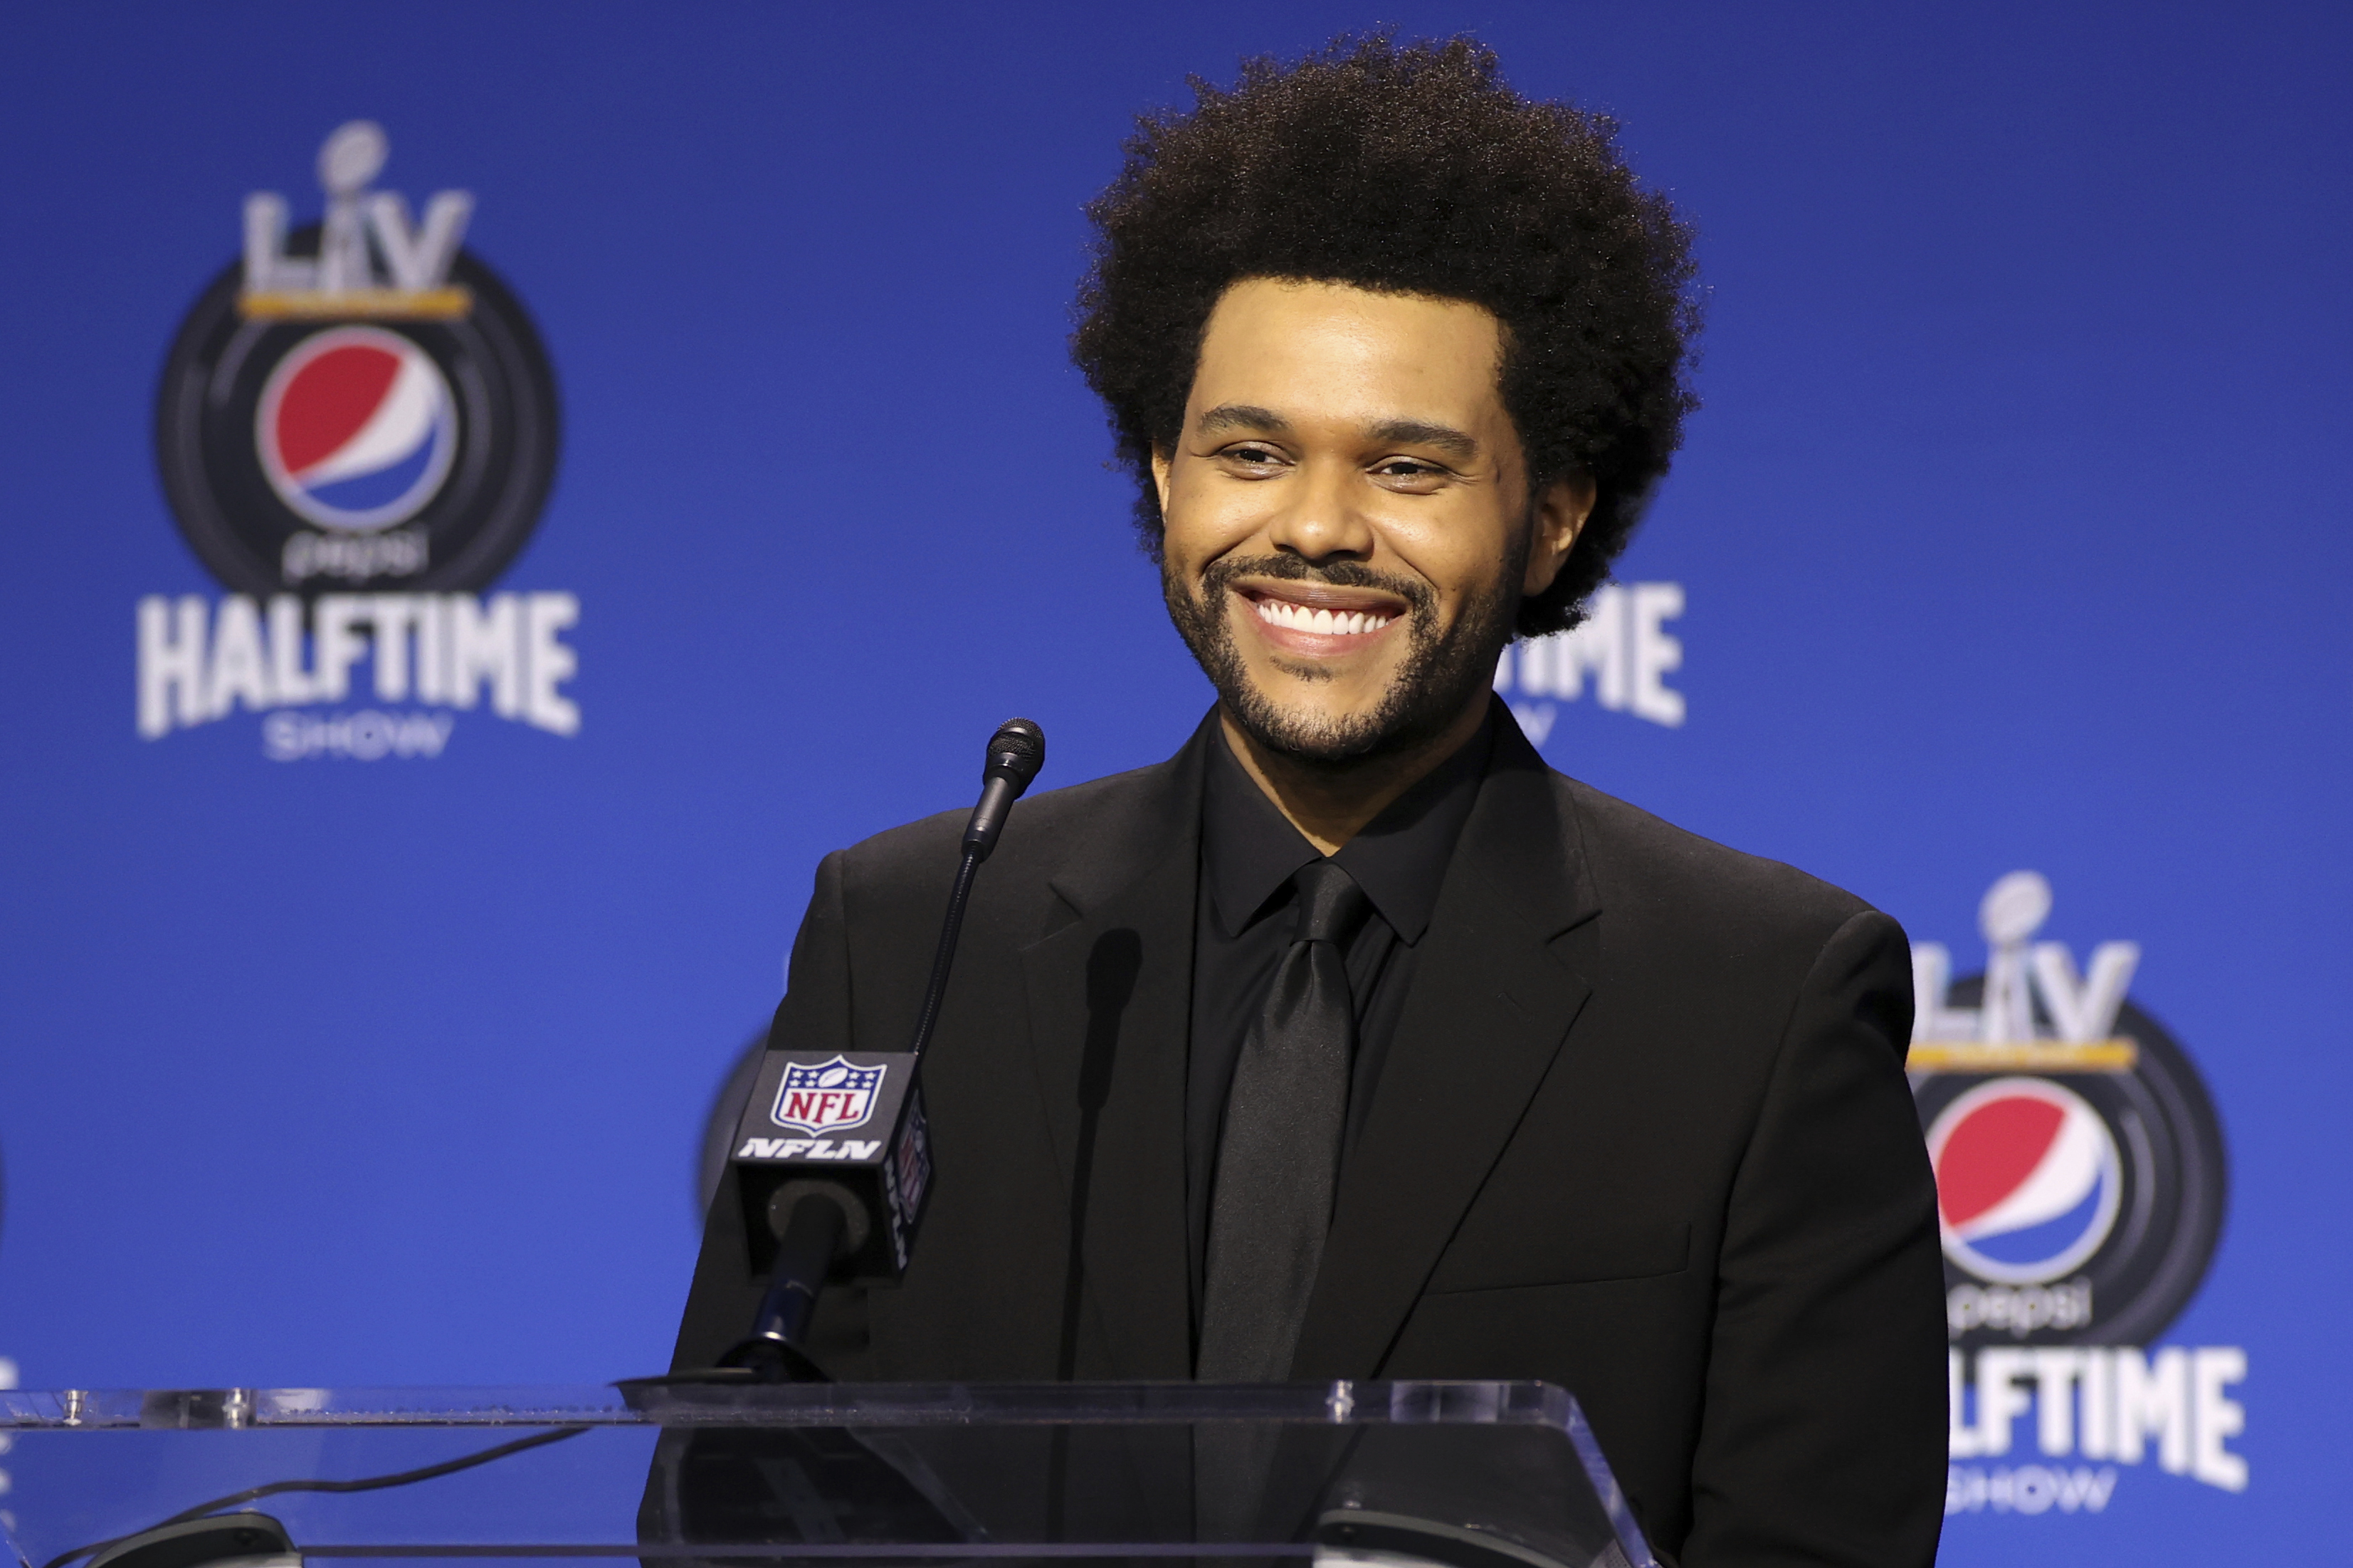 From Toronto Streets to Superbowl Stardom: The Weeknd's 'After